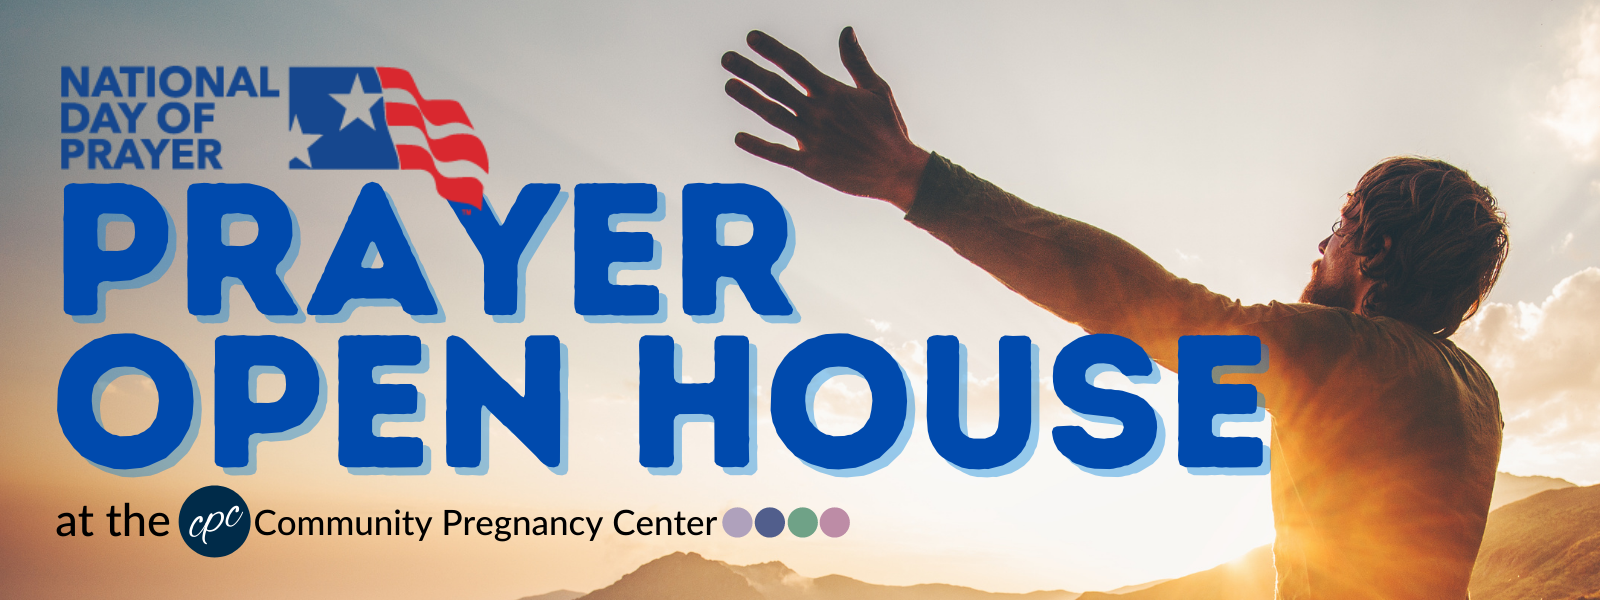 National Day of Prayer Open House